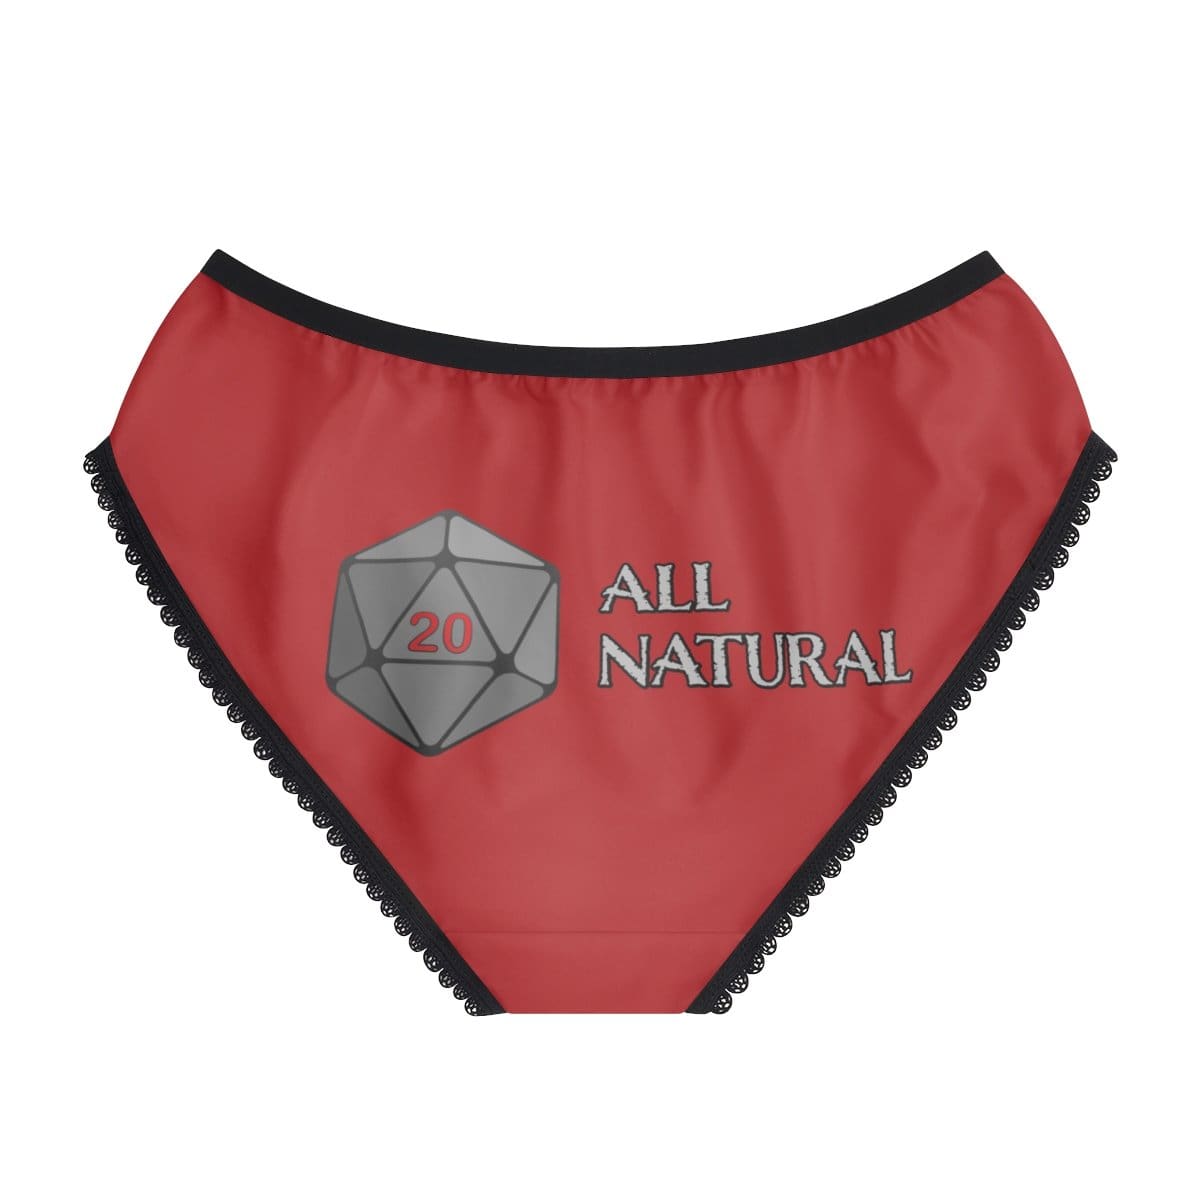 D20 All Natural - Grey on Red Womens Briefs - All Over Prints